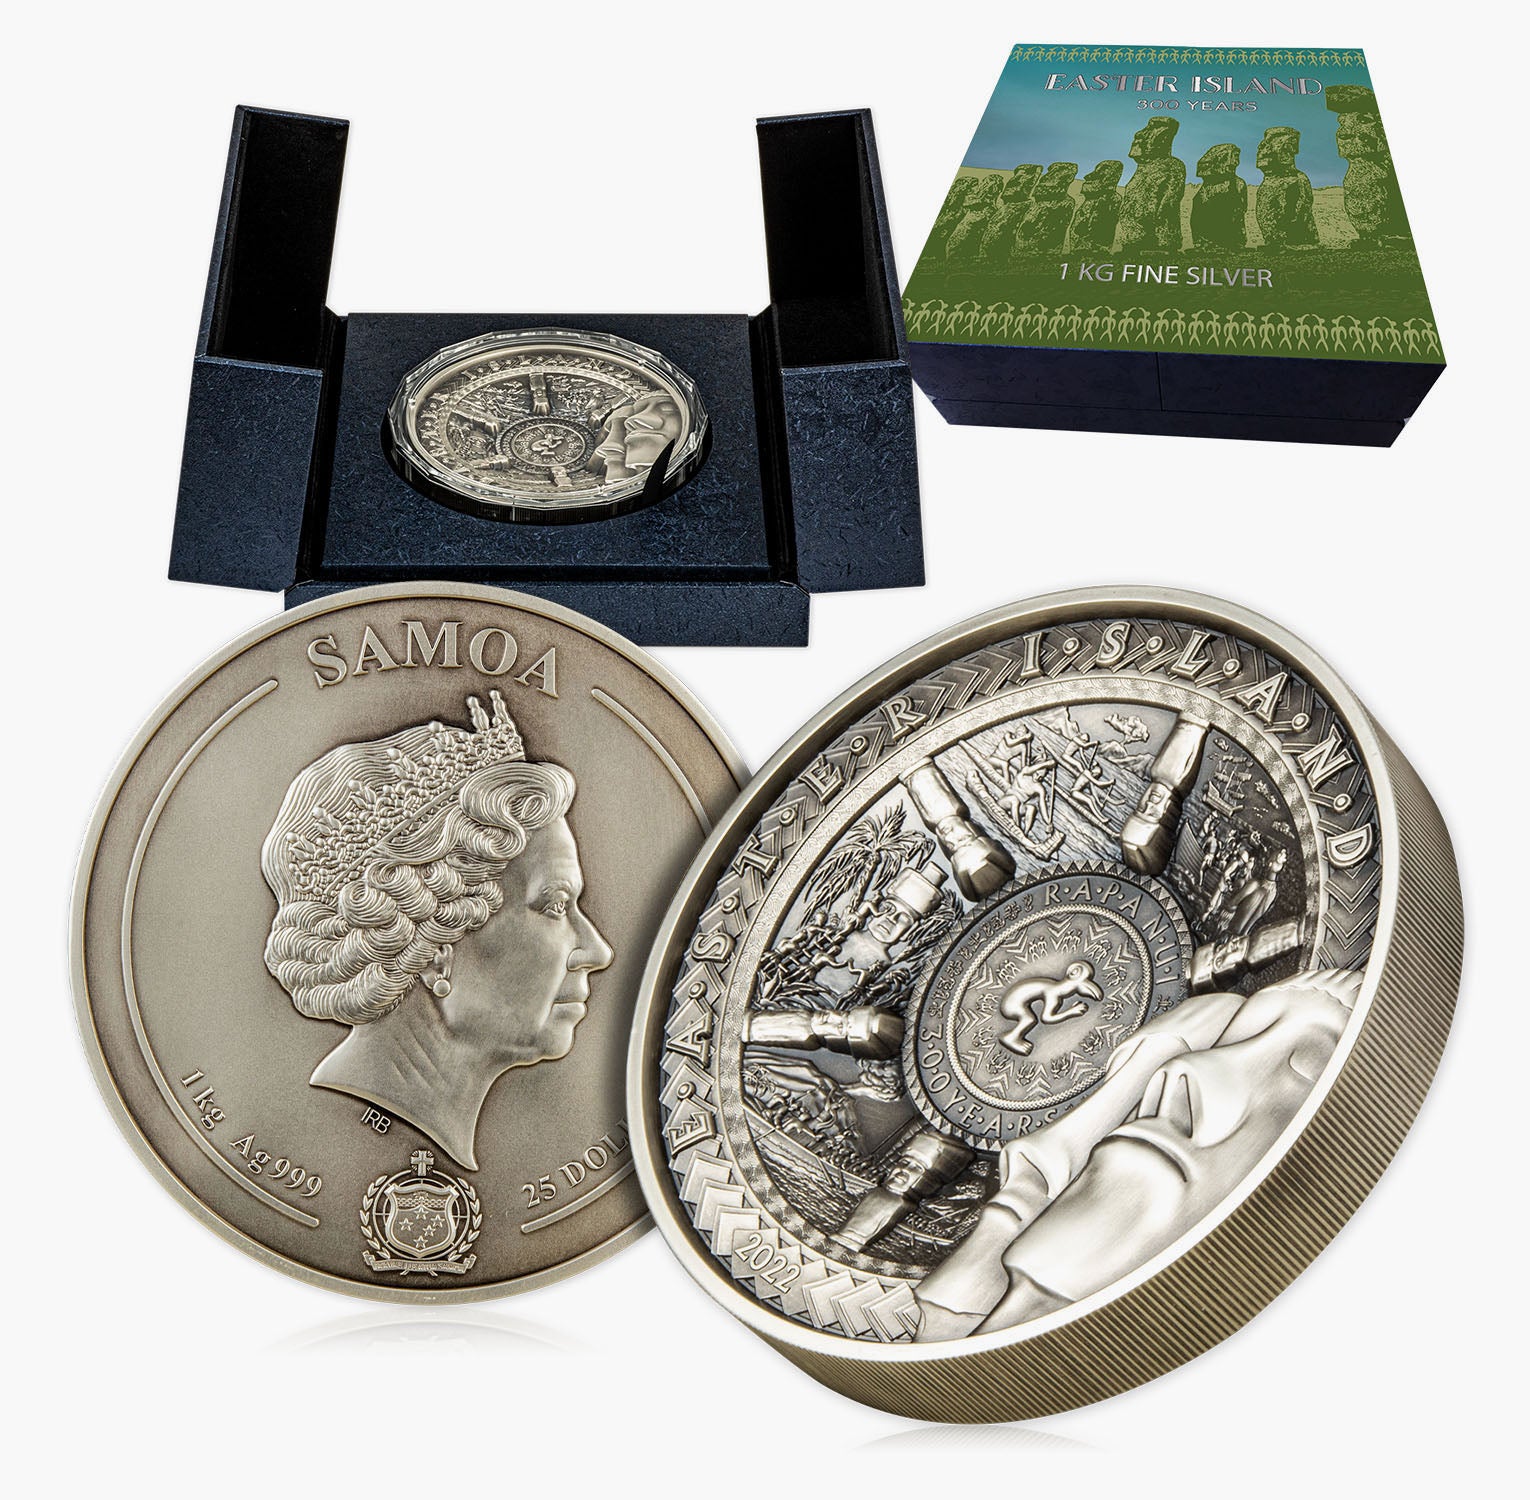 Easter Island 1kg Silver Coin